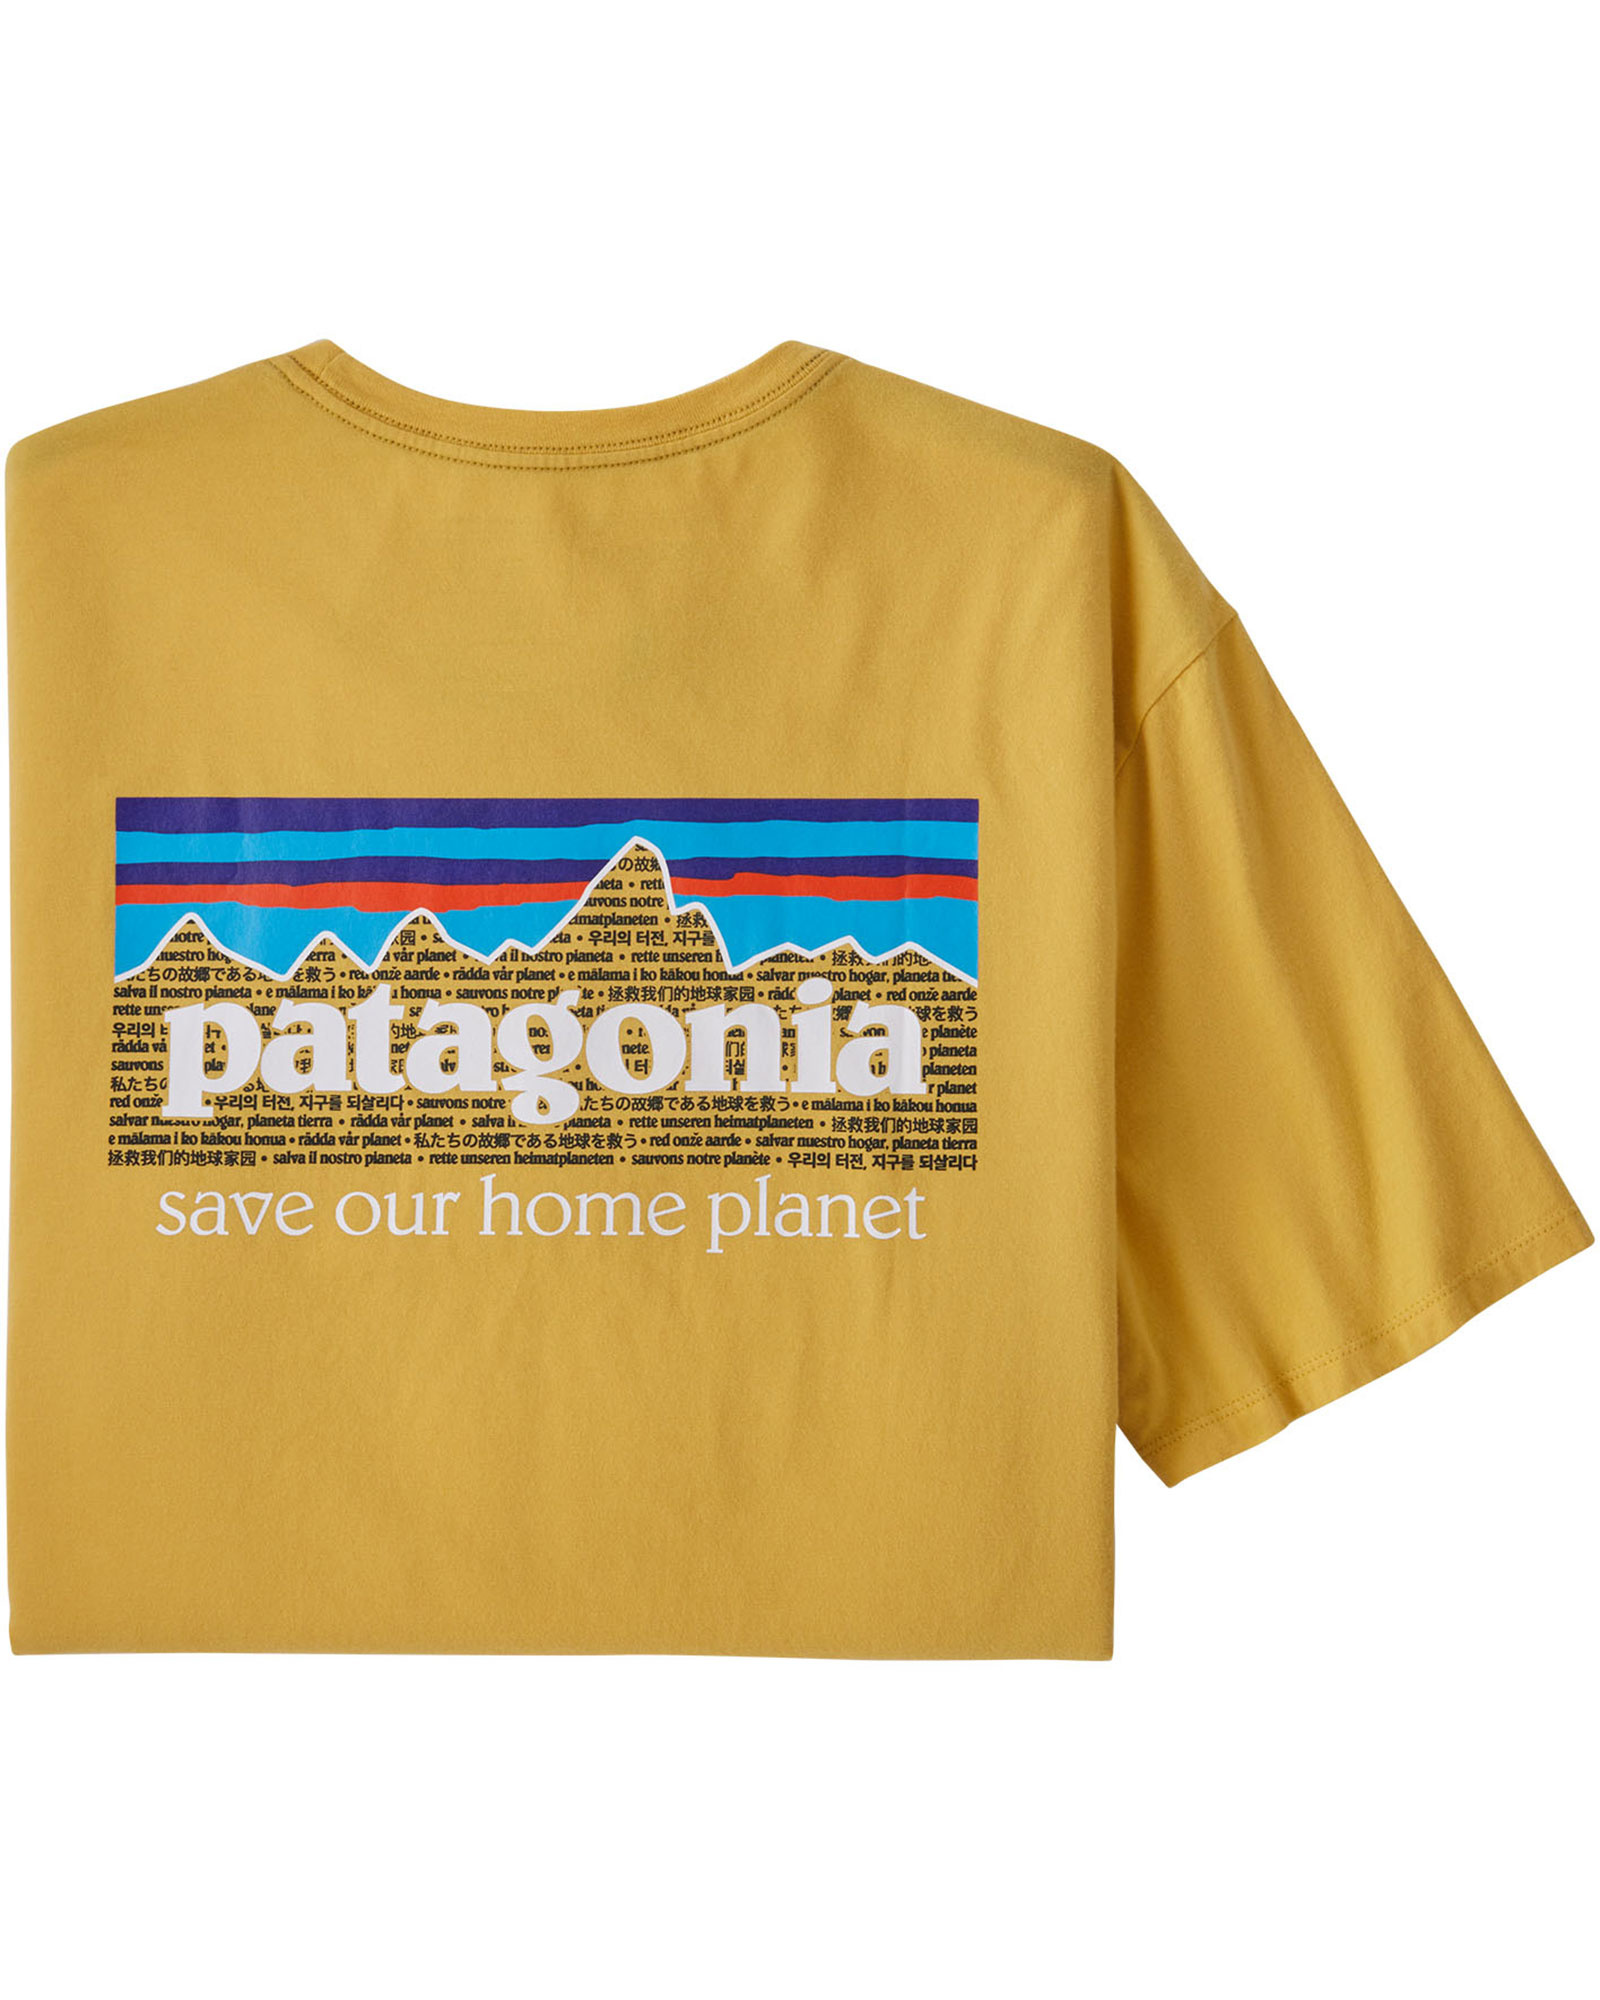 Patagonia P 6 Mission Men’s Organic Cotton Tee - Surfboard Yellow L